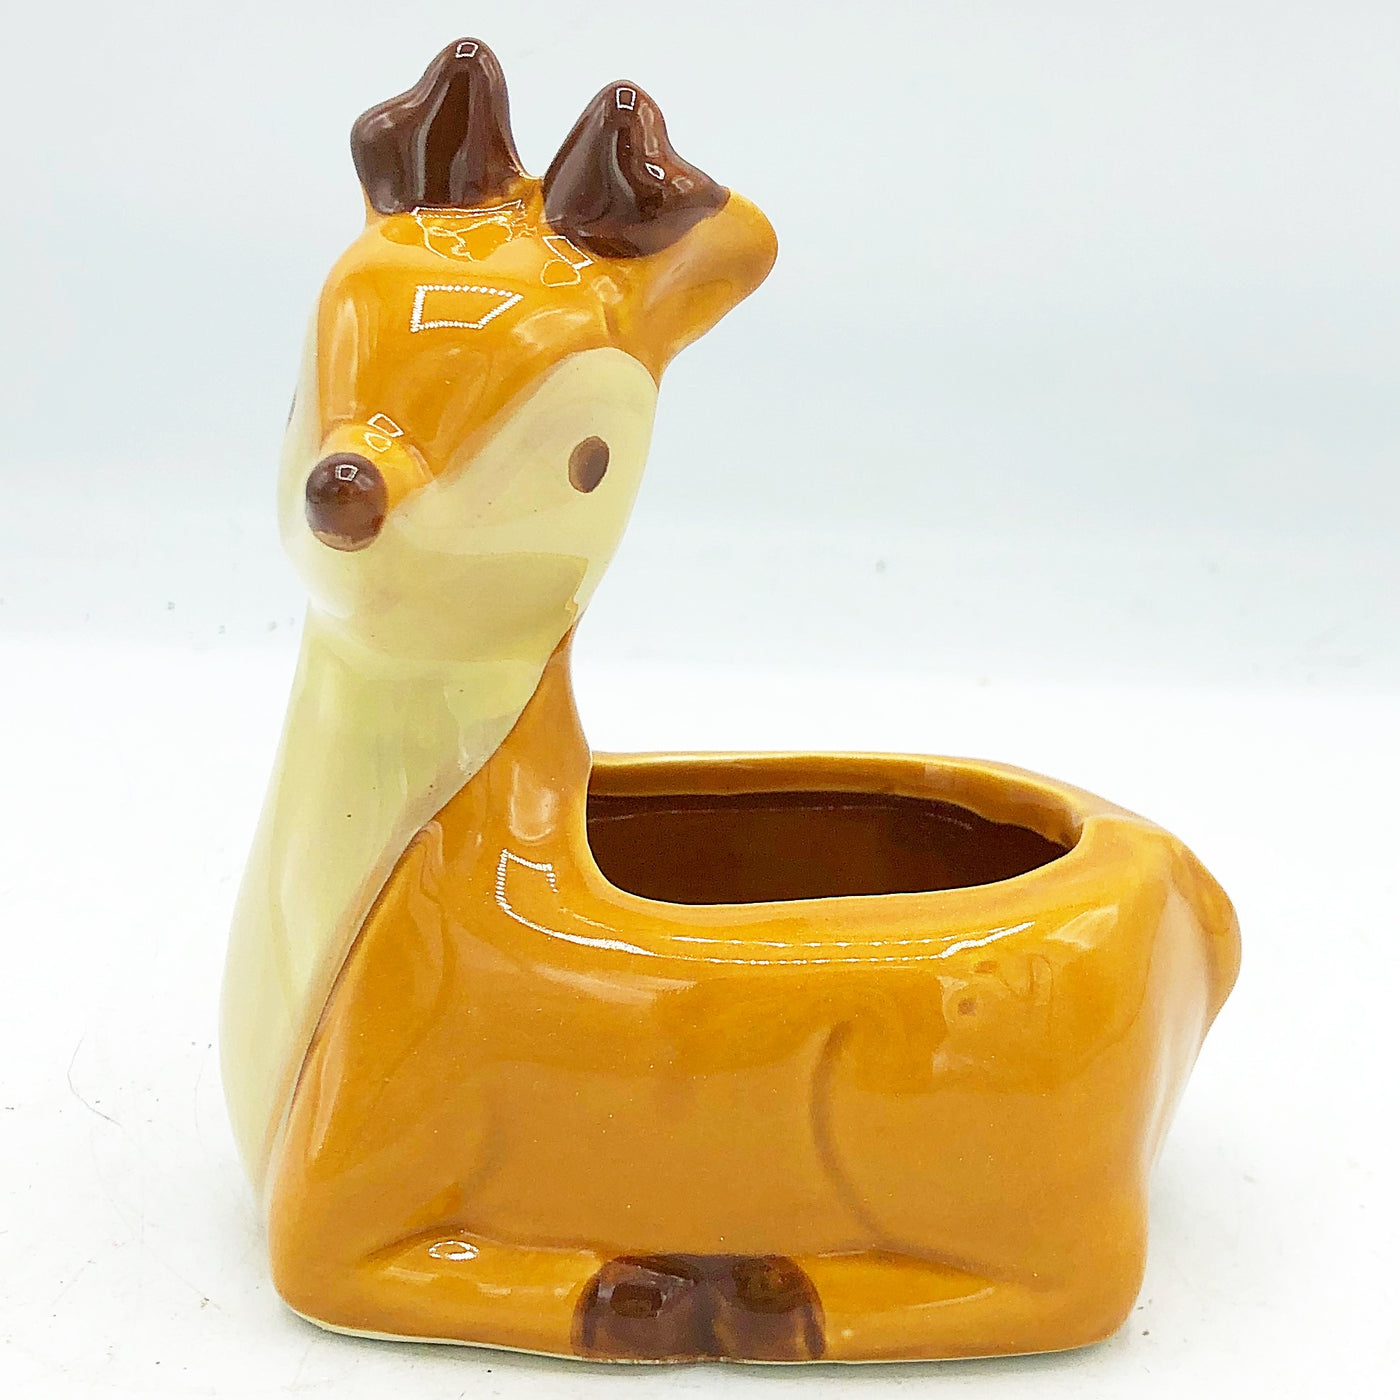 Deer Ceramic Planter Great For Succulents And Small Plants